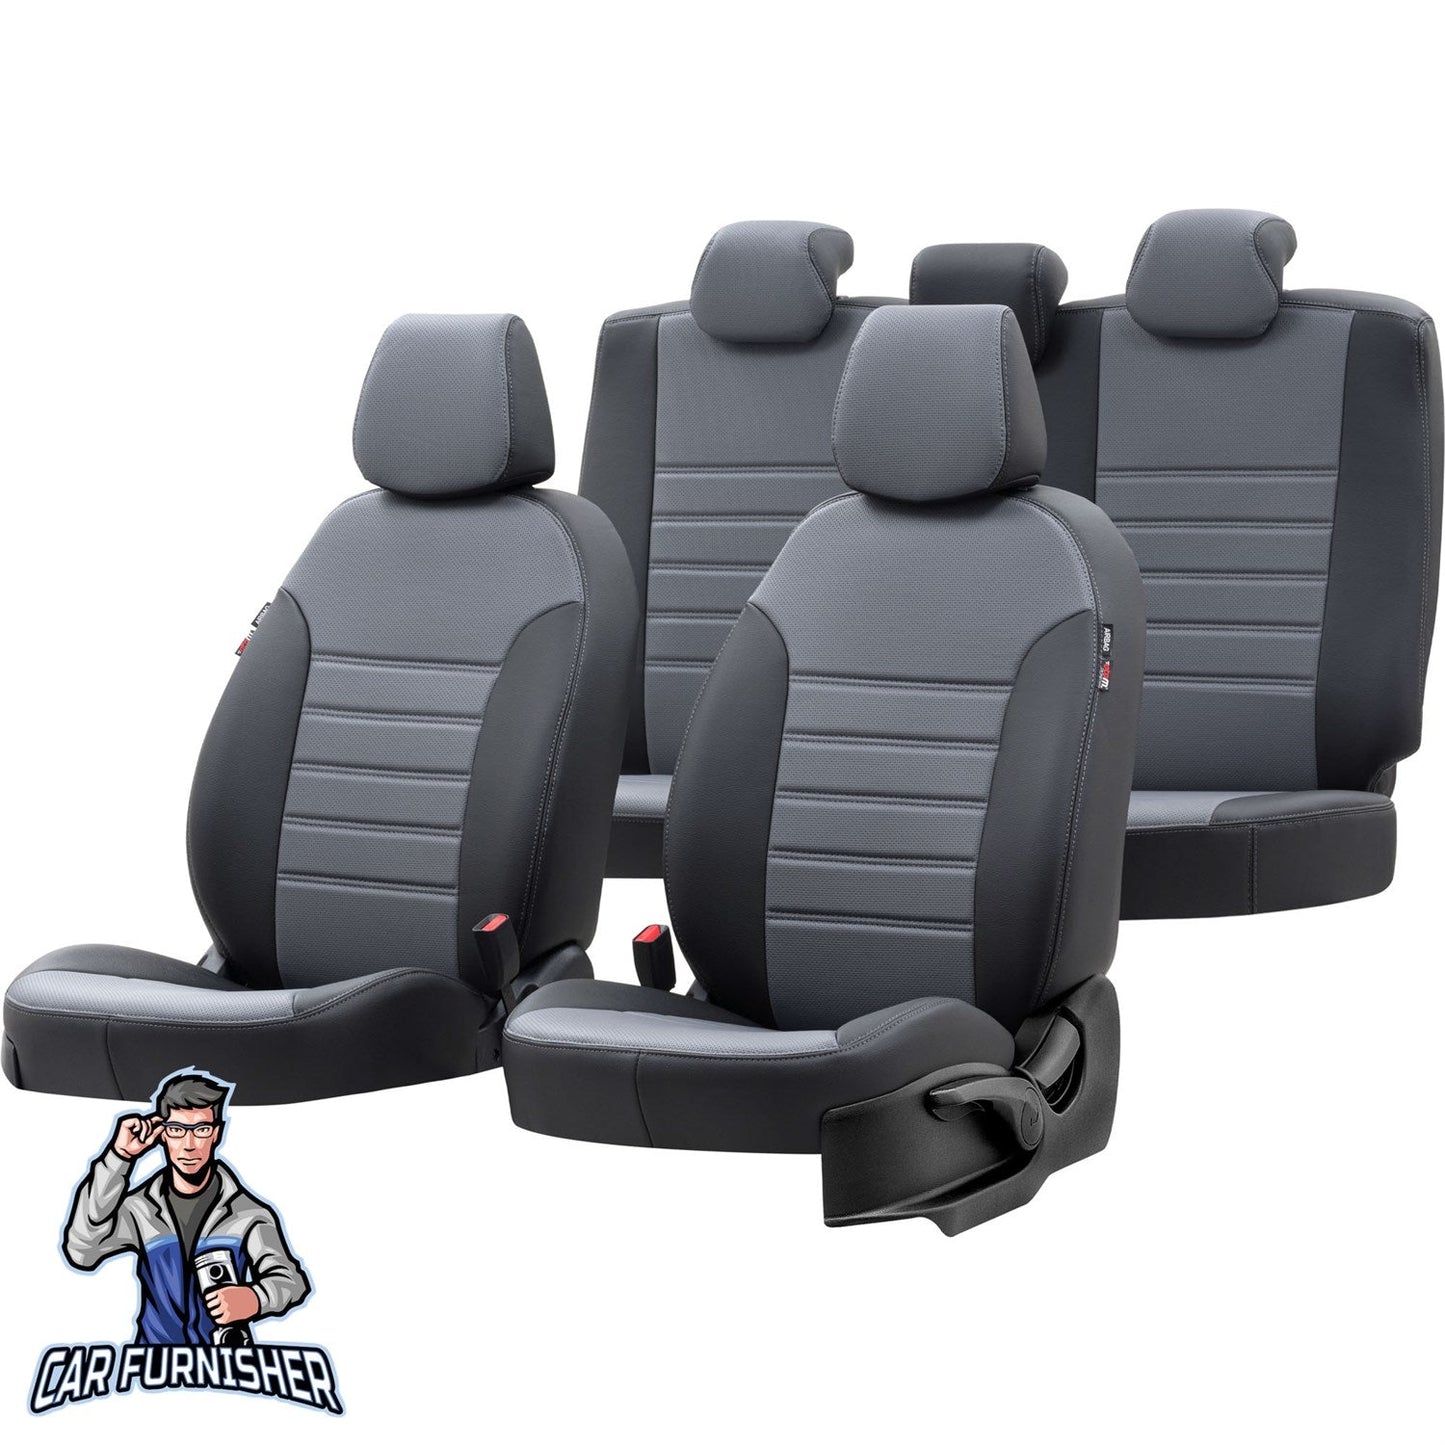 Toyota Yaris Seat Cover New York Leather Design Smoked Black Leather